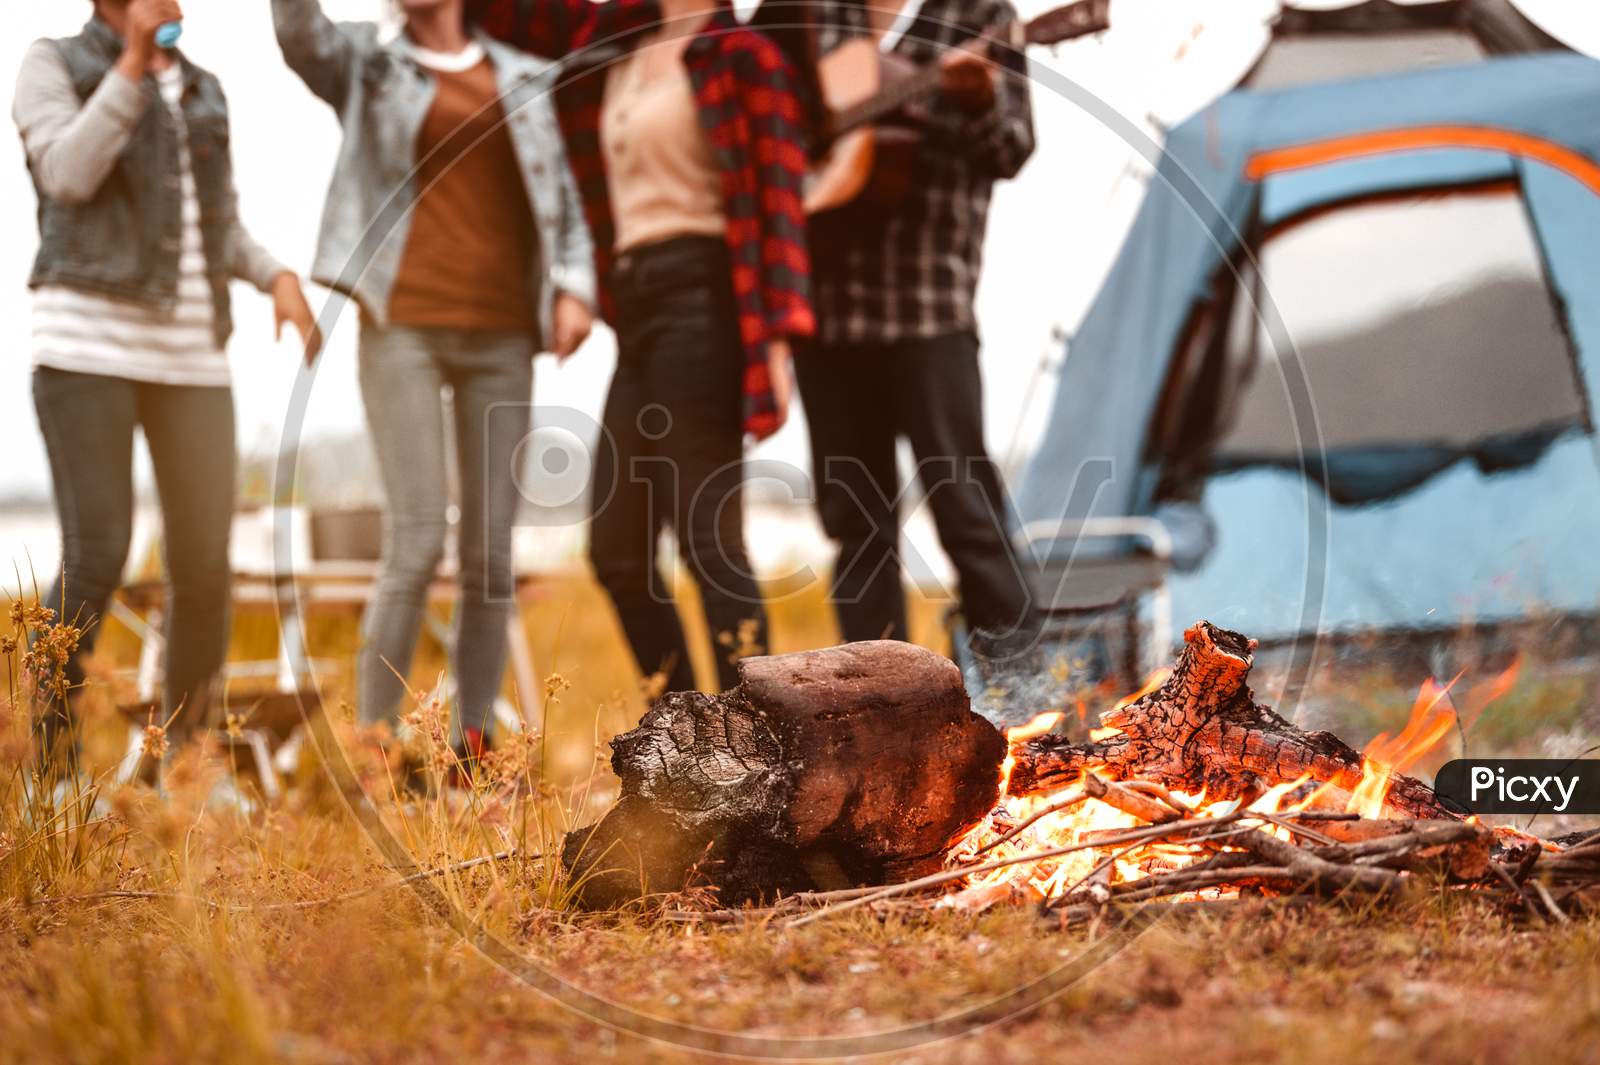 Closeup Of Campfire And Friendship Dancing To Beat Of The Music For Celebrating In Party With Mountain Meadow And Lake View Background. People Lifestyle And Travel Vacation. Picnic And Camping Tent